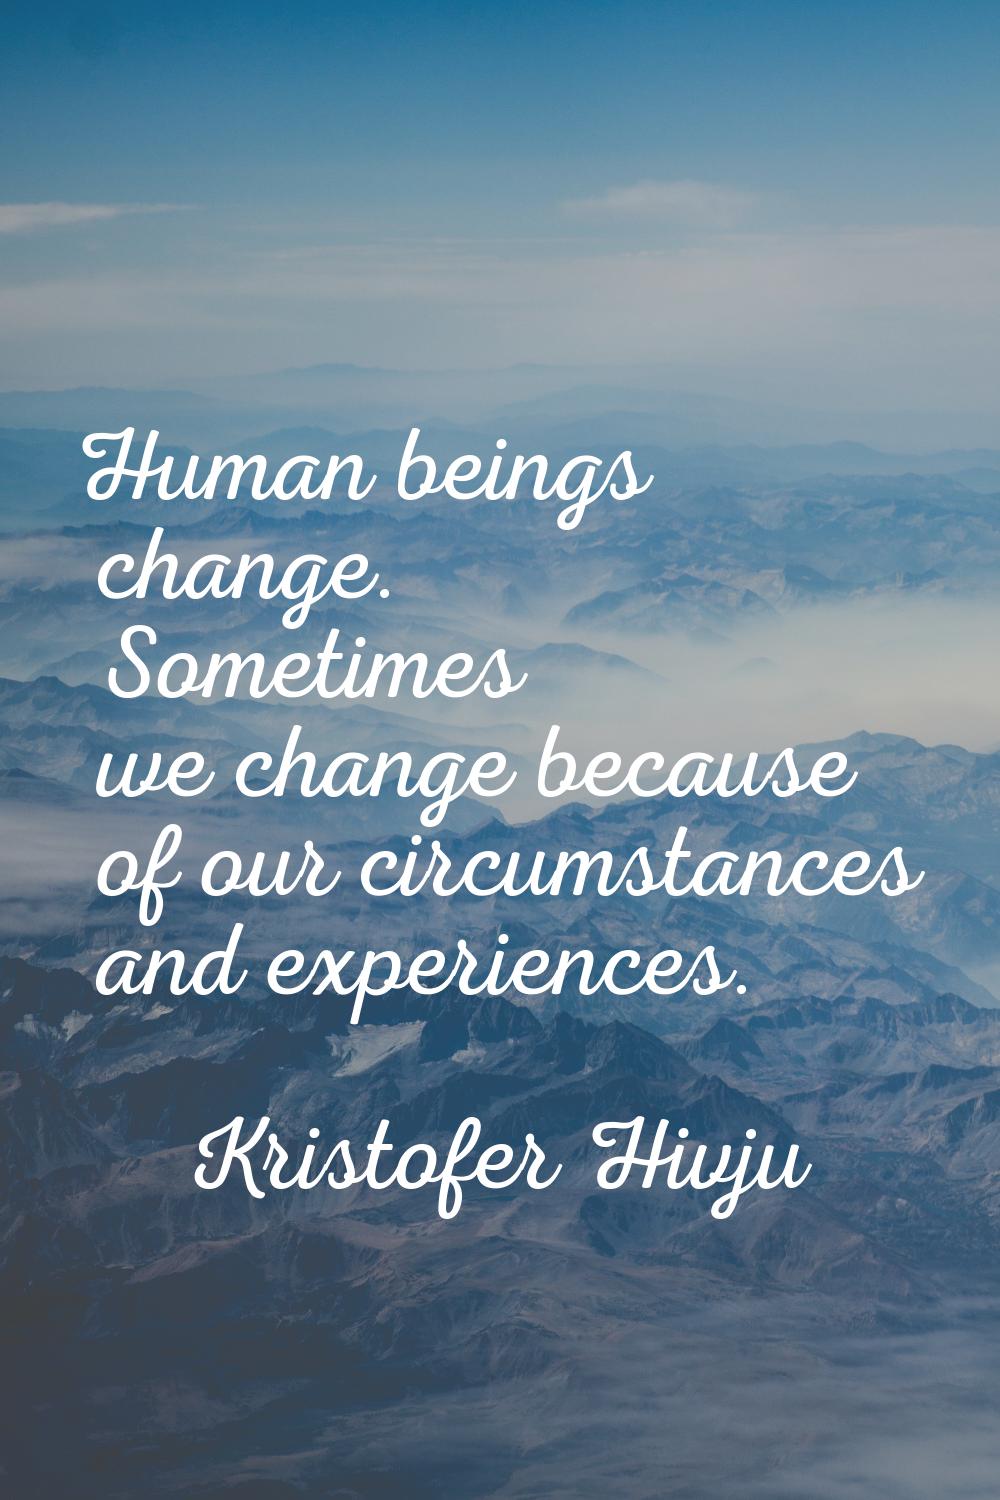 Human beings change. Sometimes we change because of our circumstances and experiences.